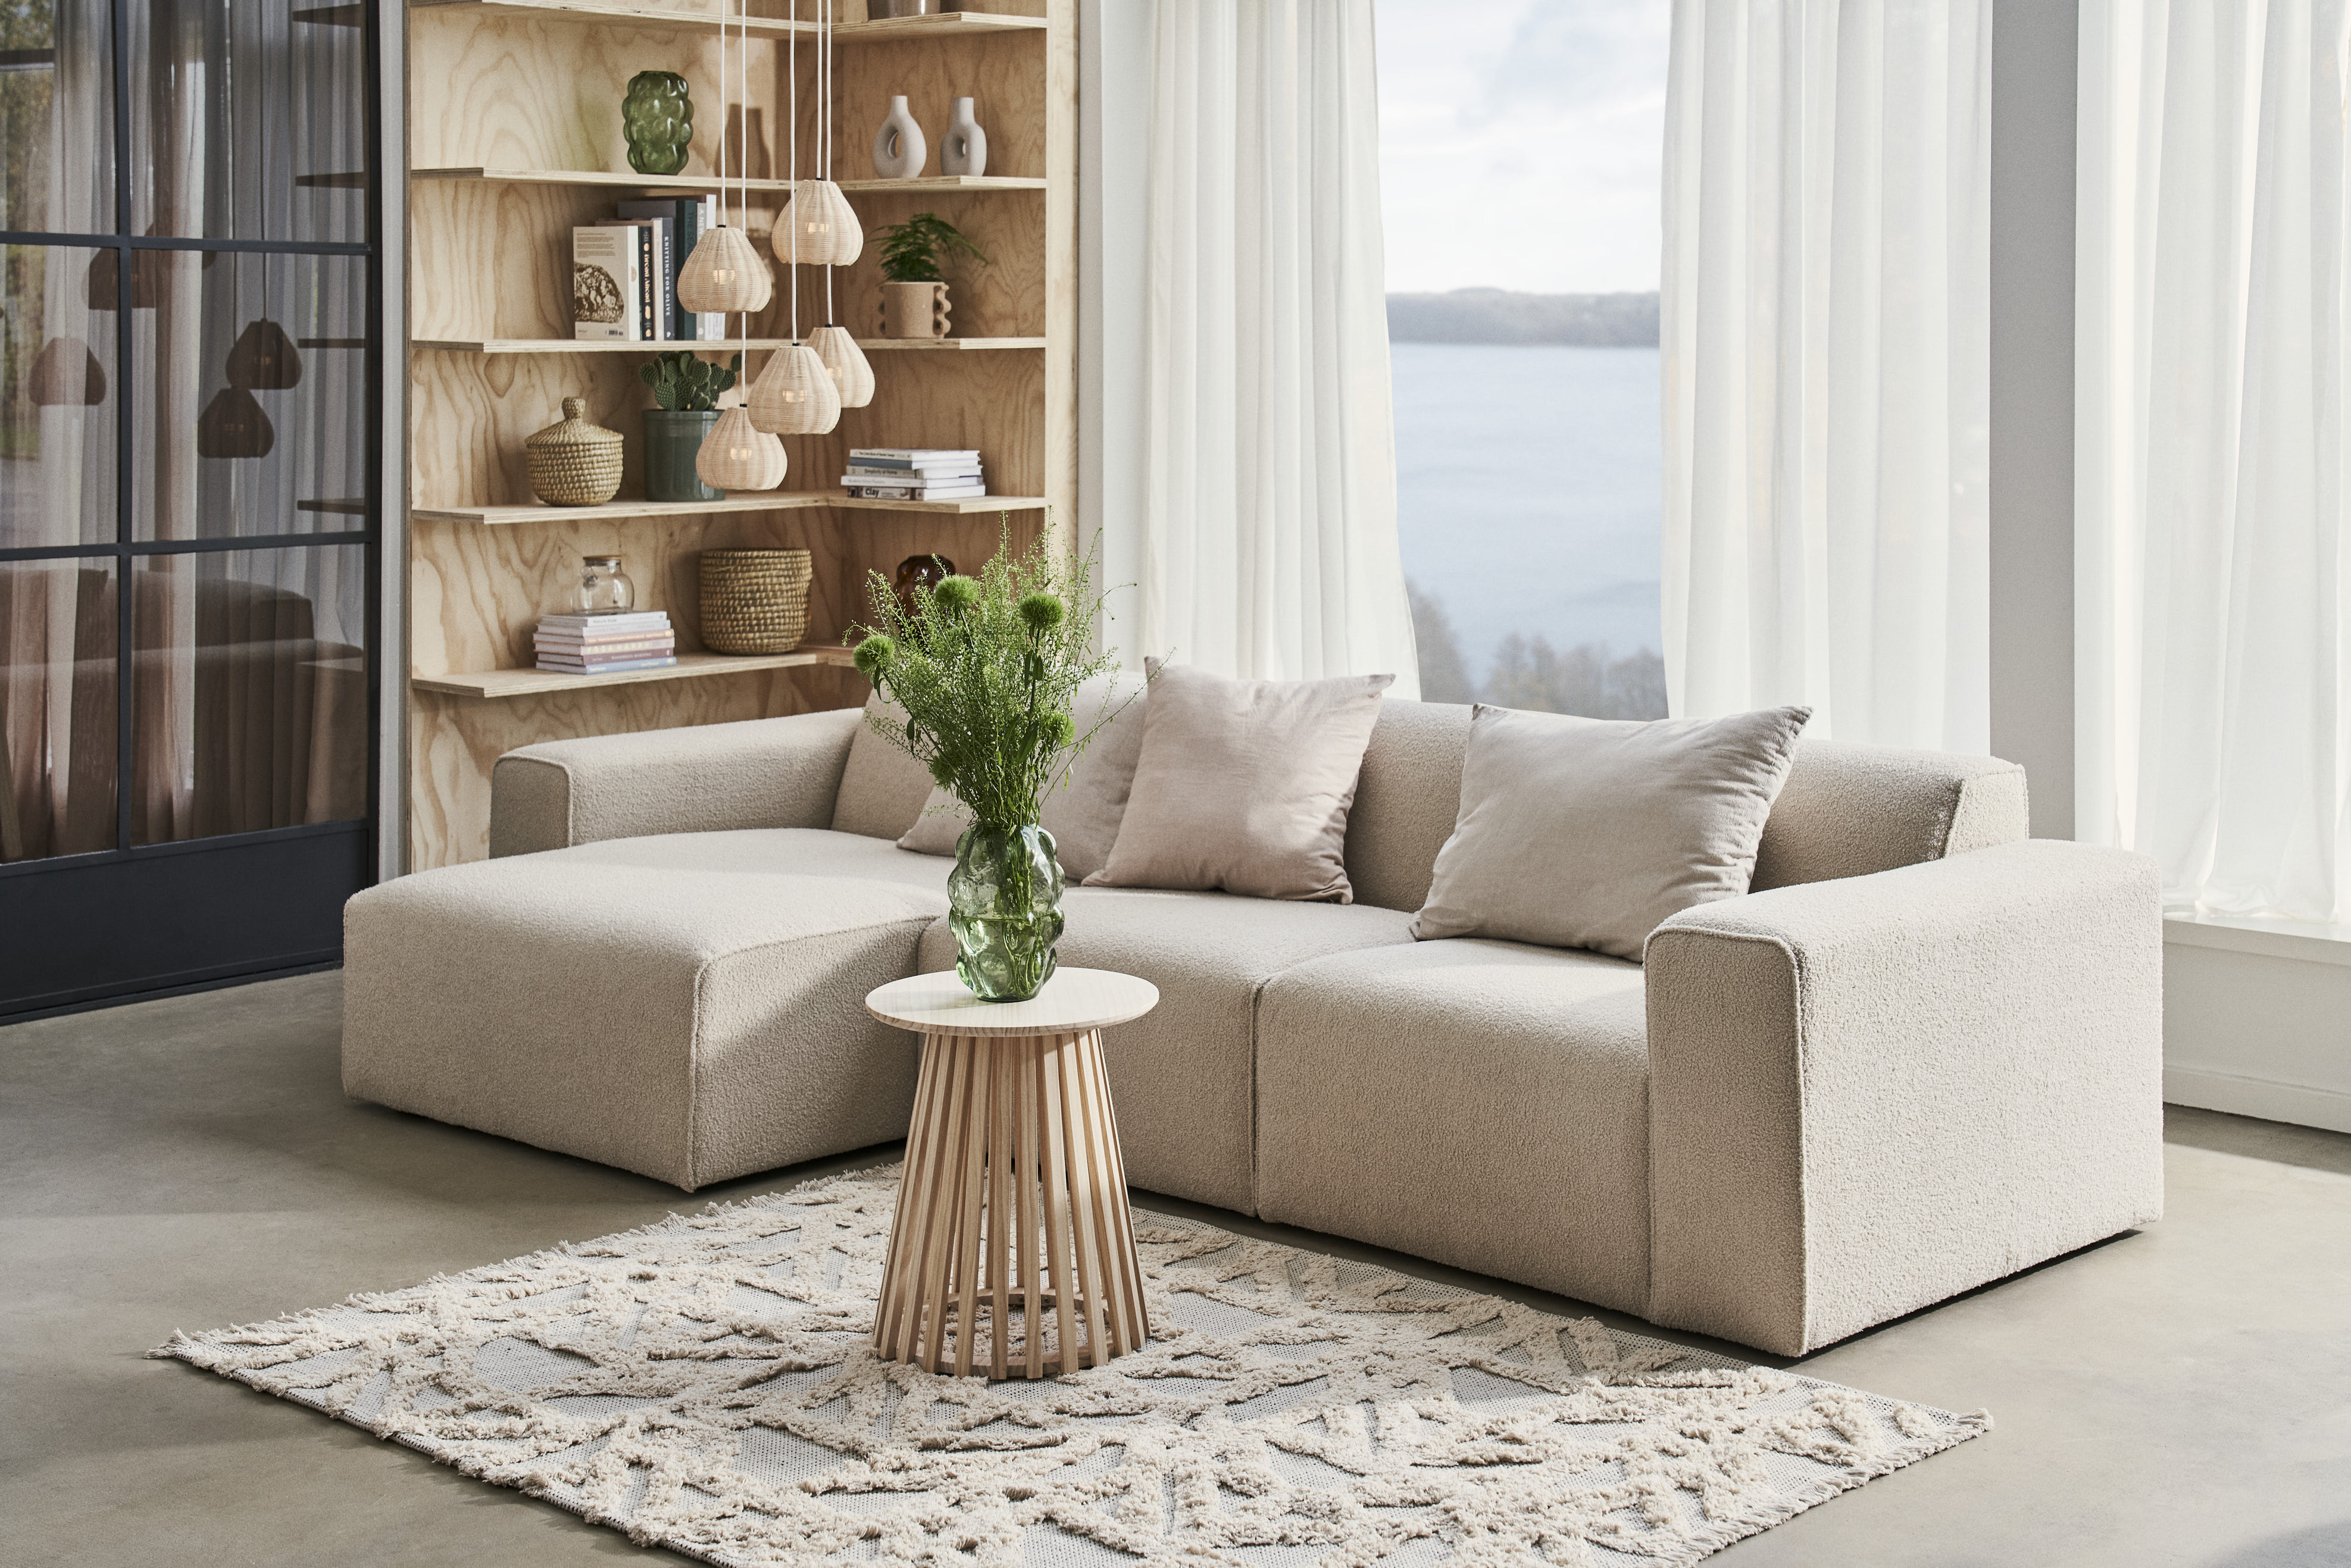 sostrene-grene_room-to-dream-collection_available-from-2-february-2023-19